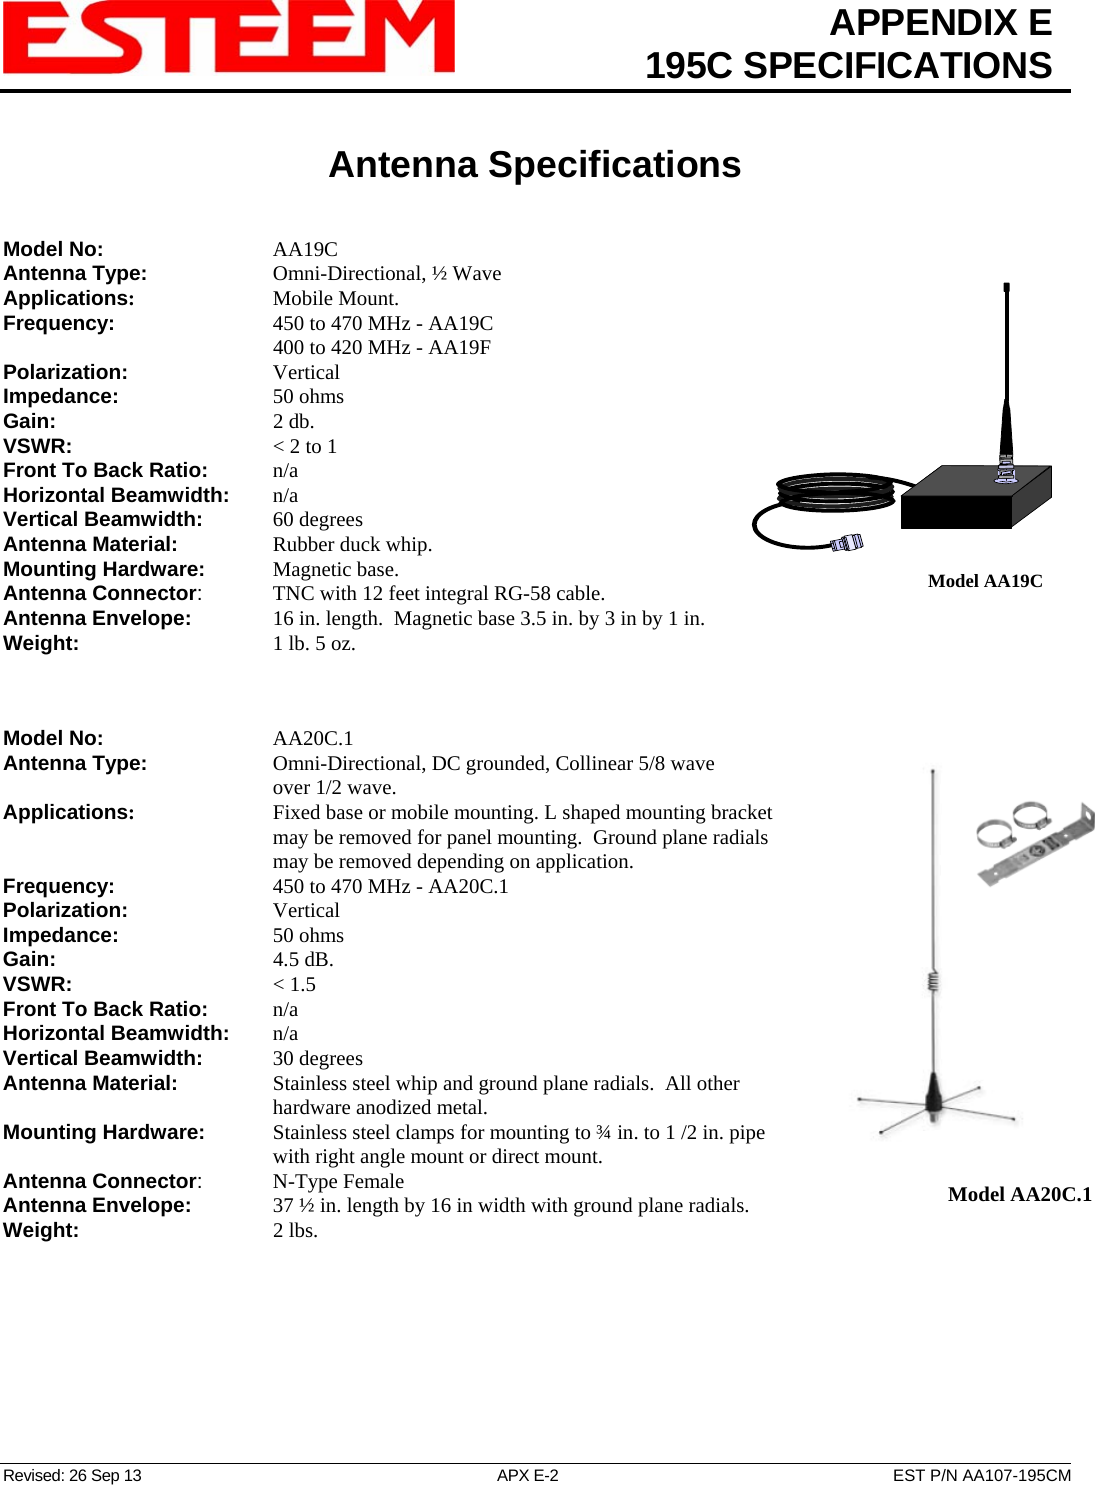  APPENDIX E  195C SPECIFICATIONS   Antenna Specifications   Revised: 26 Sep 13  APX E-2  EST P/N AA107-195CM Model No:    AA19C Antenna Type:   Omni-Directional, ½ Wave  Applications:    Mobile Mount. Frequency:    450 to 470 MHz - AA19C       400 to 420 MHz - AA19F  Polarization:    Vertical Impedance:    50 ohms Gain:     2 db. VSWR:      &lt; 2 to 1  Front To Back Ratio:   n/a Horizontal Beamwidth:  n/a Vertical Beamwidth:      60 degrees Antenna Material:     Rubber duck whip.  Mounting Hardware:      Magnetic base.   Model AA19CAntenna Connector:    TNC with 12 feet integral RG-58 cable. Antenna Envelope:   16 in. length.  Magnetic base 3.5 in. by 3 in by 1 in. Weight:           1 lb. 5 oz.     Model No:    AA20C.1 Antenna Type:   Omni-Directional, DC grounded, Collinear 5/8 wave over 1/2 wave.    Model AA20C.1   Applications:       Fixed base or mobile mounting. L shaped mounting bracket may be removed for panel mounting.  Ground plane radials may be removed depending on application. Frequency:    450 to 470 MHz - AA20C.1 Polarization:    Vertical Impedance:    50 ohms Gain:     4.5 dB. VSWR:      &lt; 1.5  Front To Back Ratio:   n/a Horizontal Beamwidth:  n/a Vertical Beamwidth:      30 degrees Antenna Material:     Stainless steel whip and ground plane radials.  All other hardware anodized metal.  Mounting Hardware:      Stainless steel clamps for mounting to ¾ in. to 1 /2 in. pipe with right angle mount or direct mount.  Antenna Connector:   N-Type Female Antenna Envelope:   37 ½ in. length by 16 in width with ground plane radials. Weight:       2 lbs. 